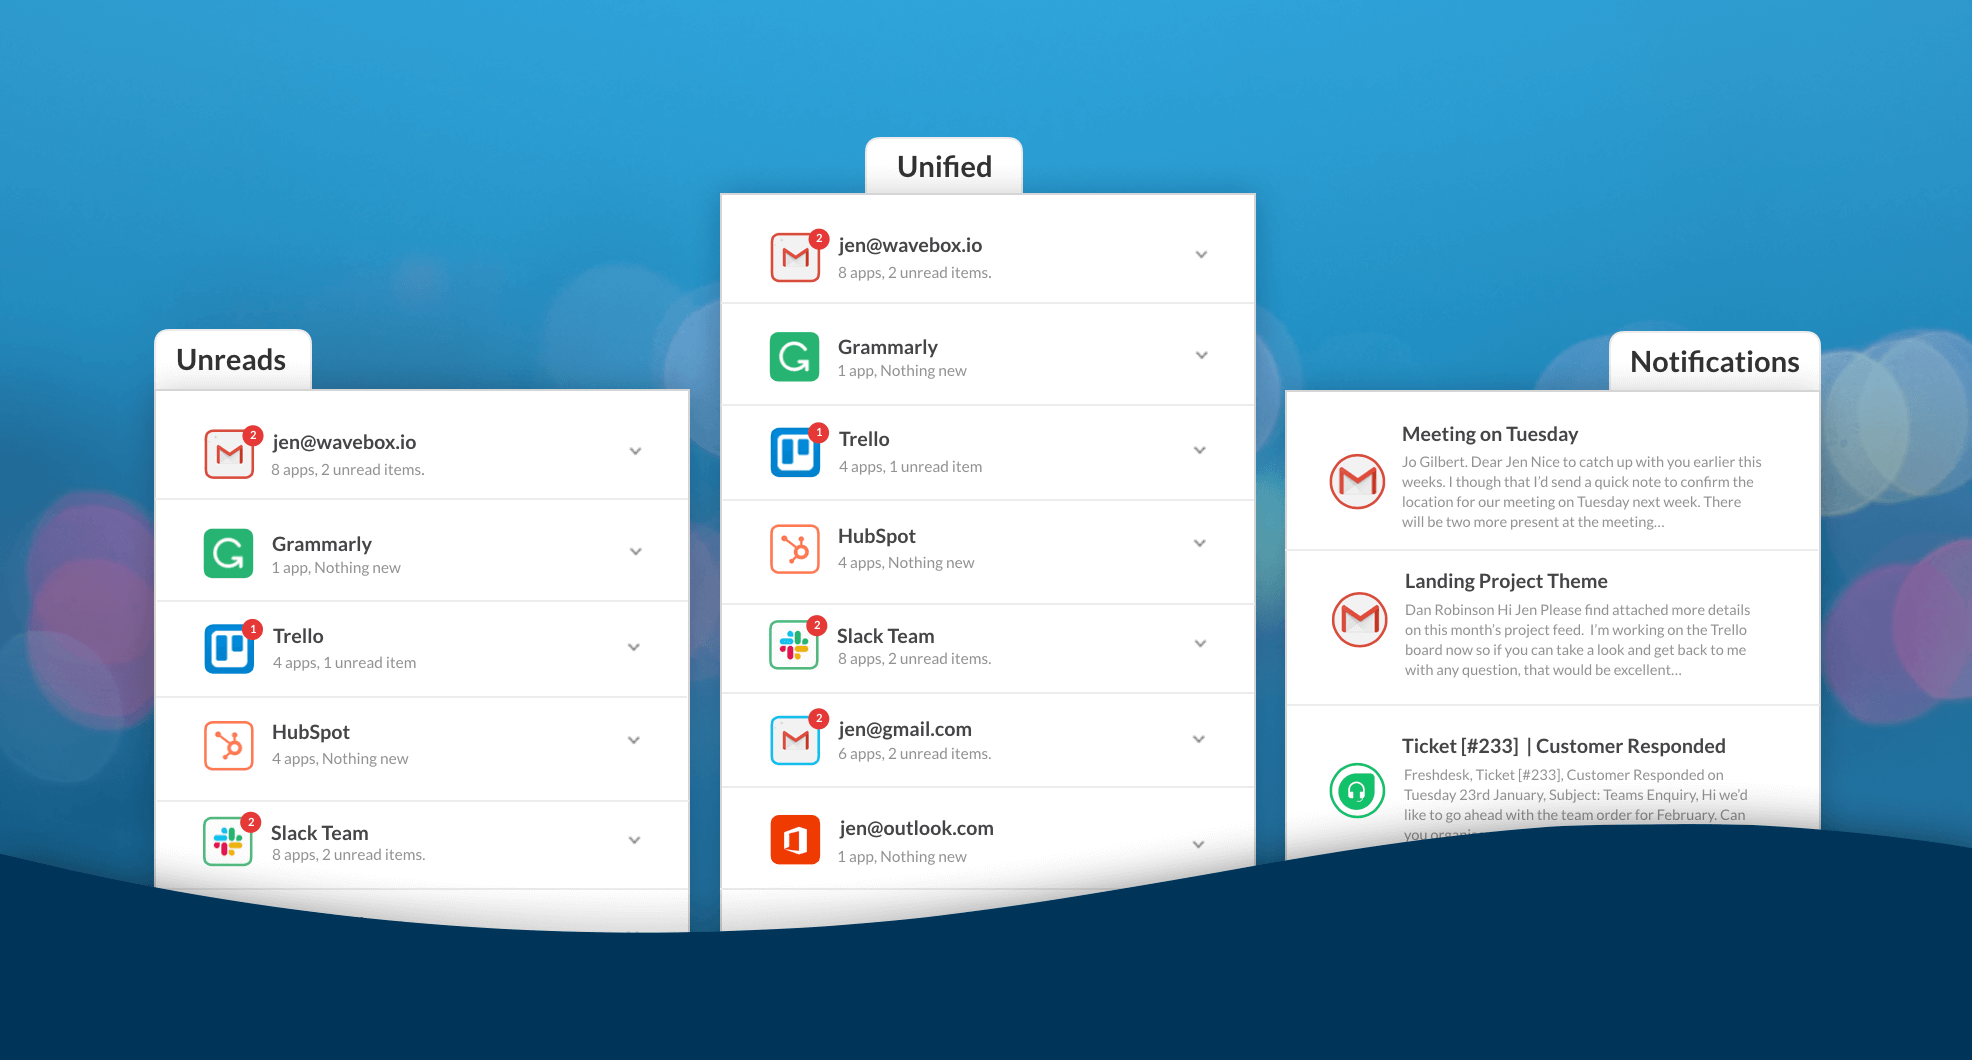 Stay Up-to-Date Across all your SaaS Apps & Tools.